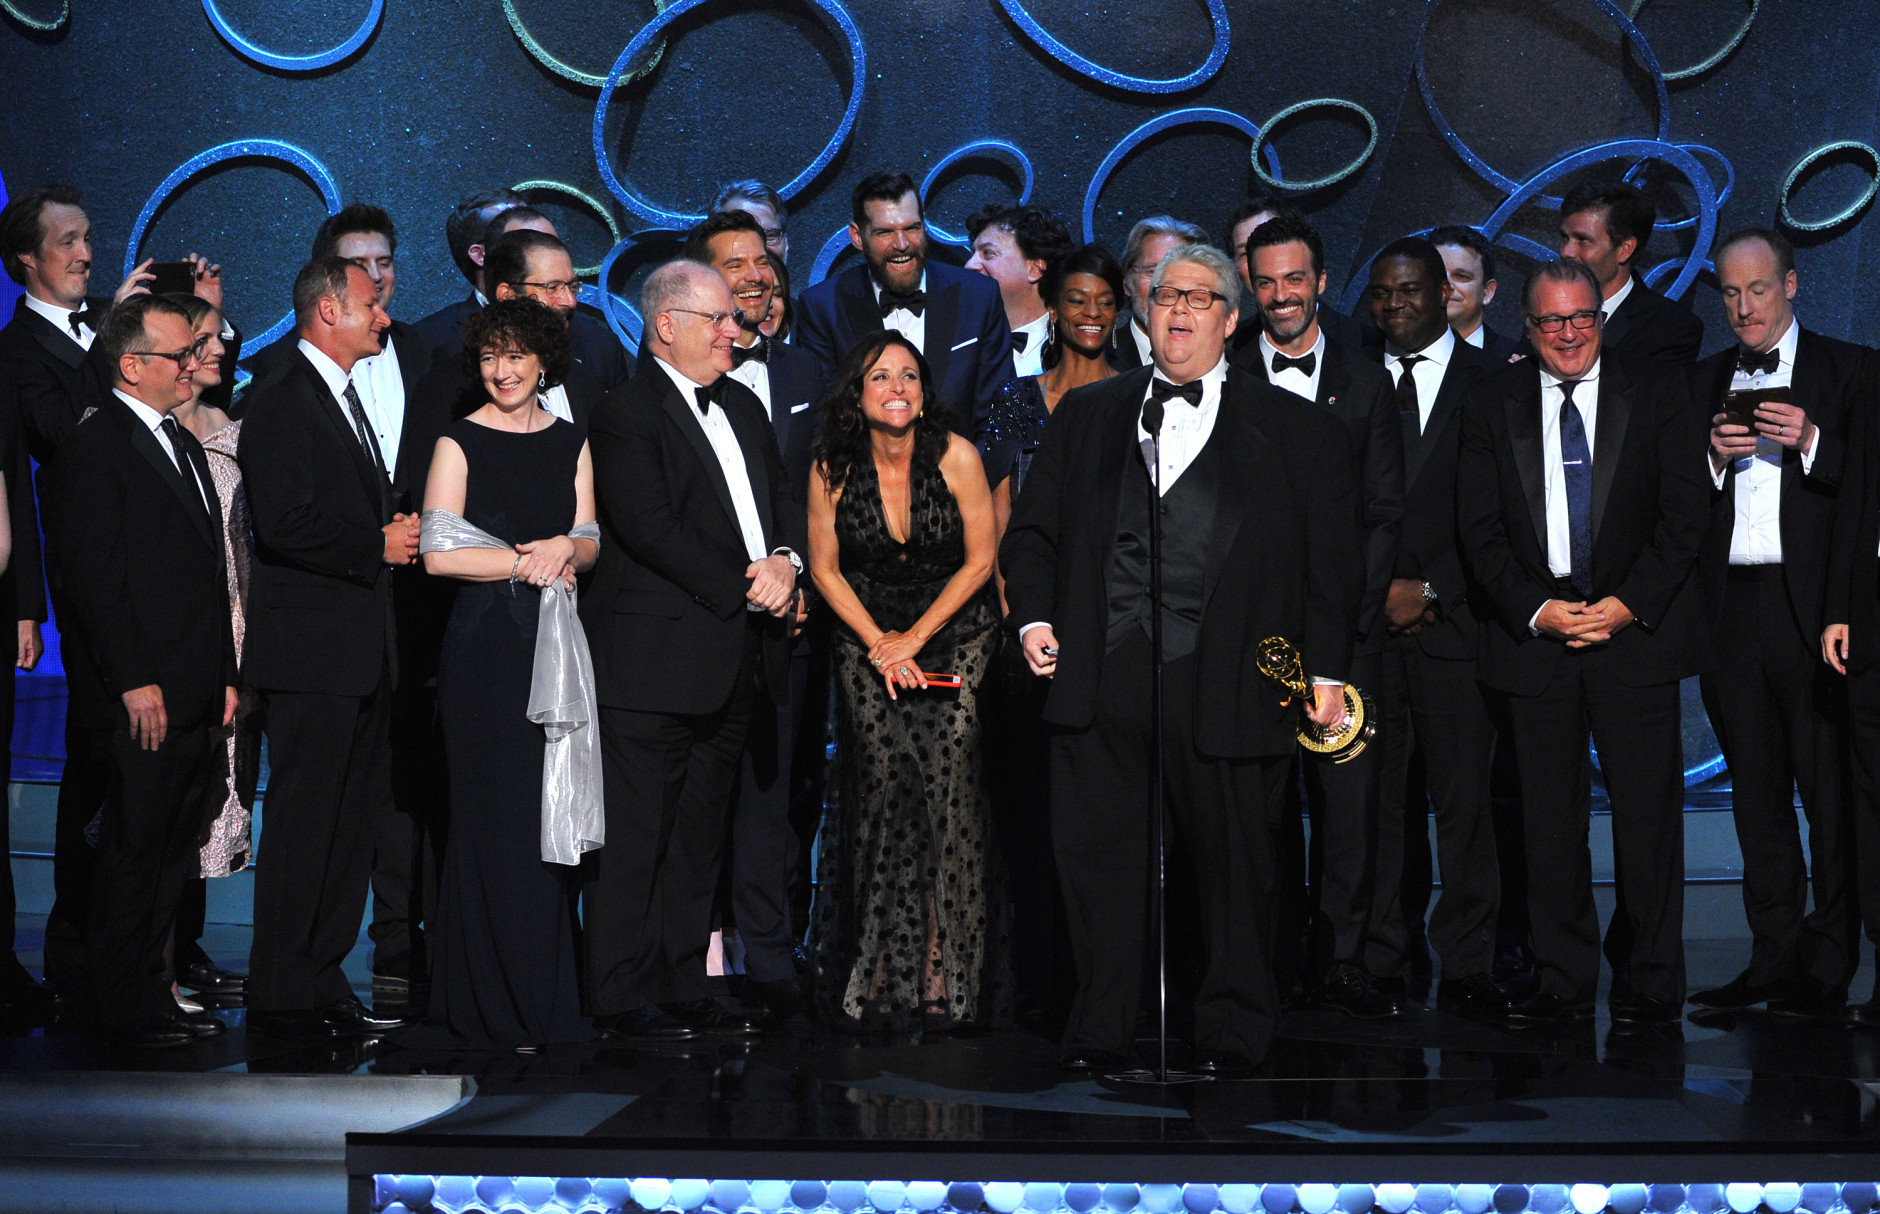 David Mandel and the cast and crew from Veep accept the award for outstanding comedy series at the 68th Primetime Emmy Awards on Sunday, Sept. 18, 2016, at the Microsoft Theater in Los Angeles. (Photo by Vince Bucci/Invision for the Television Academy/AP Images)